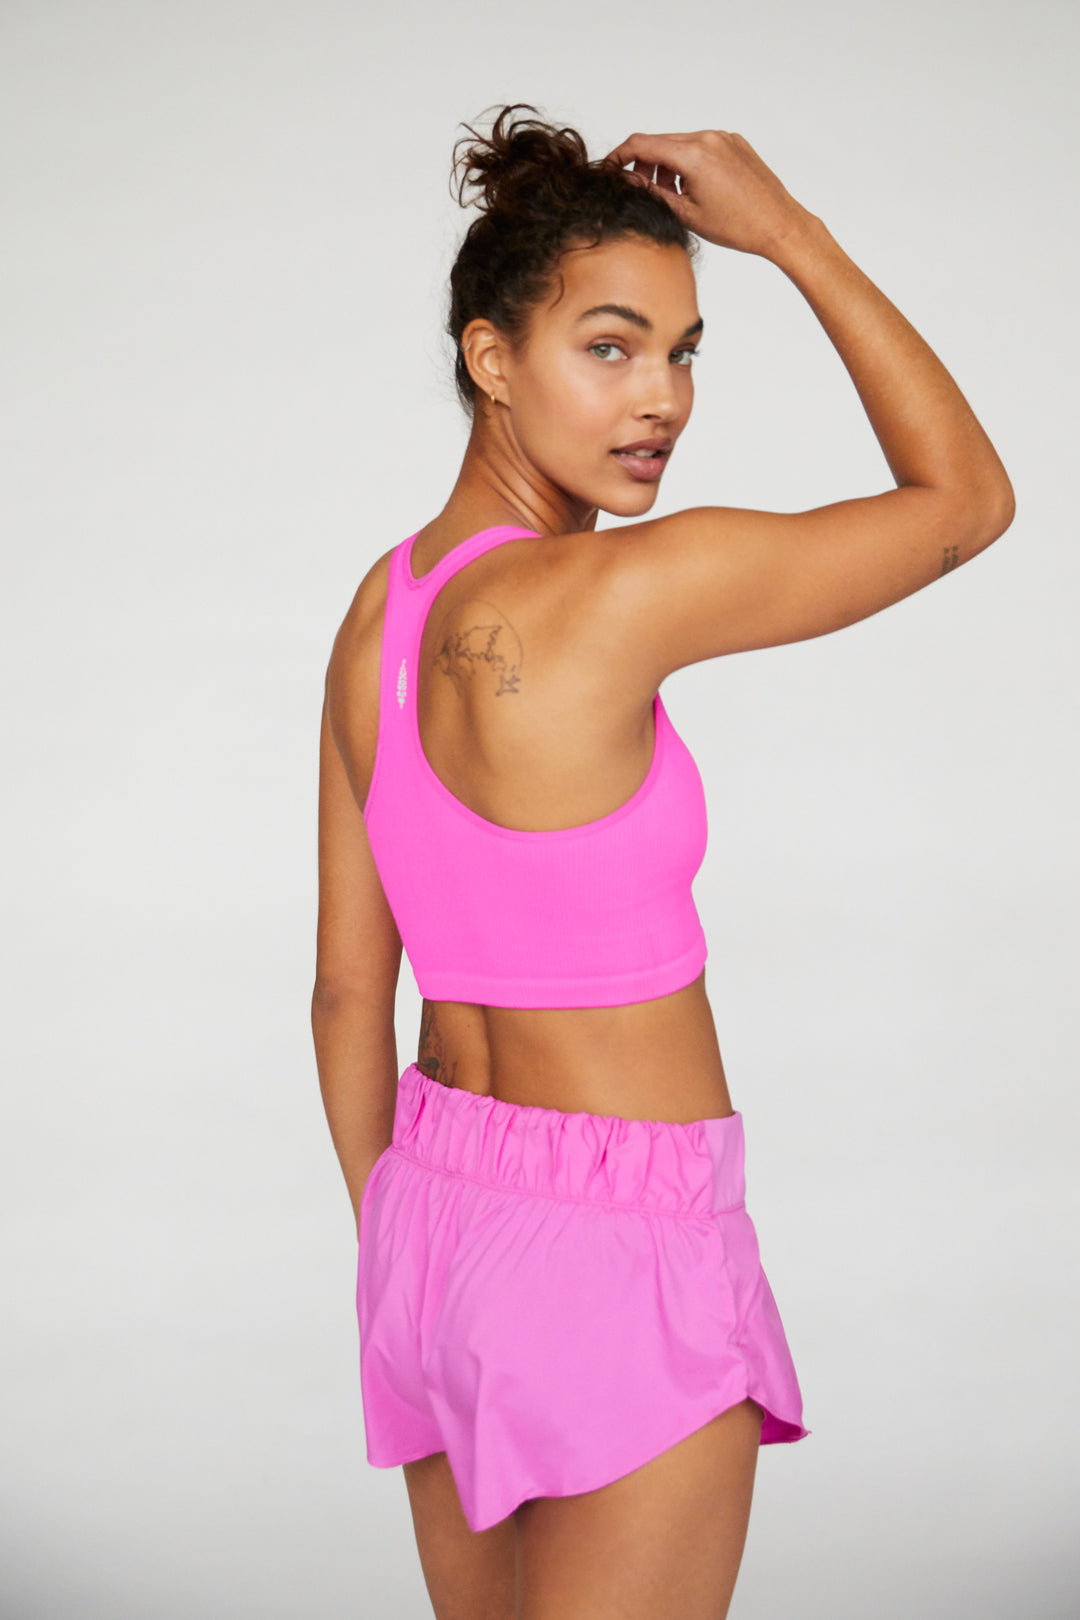 Free Throw Crop Top - Magenta
Meditate or make a move in this ribbed compression fit crop featuring a V-neck racerback design that keeps you feeling secure as you work out. Can be worn with or without a bra for extra support Formfitting silhouette Stretch fit FP Movement A destination for the life well-lived, Free People Movement offers performance-ready activewear, practice-perfect styles and beyond-the-gym staples. We believe in the power of community, in supporting and lifting each other up and always #m